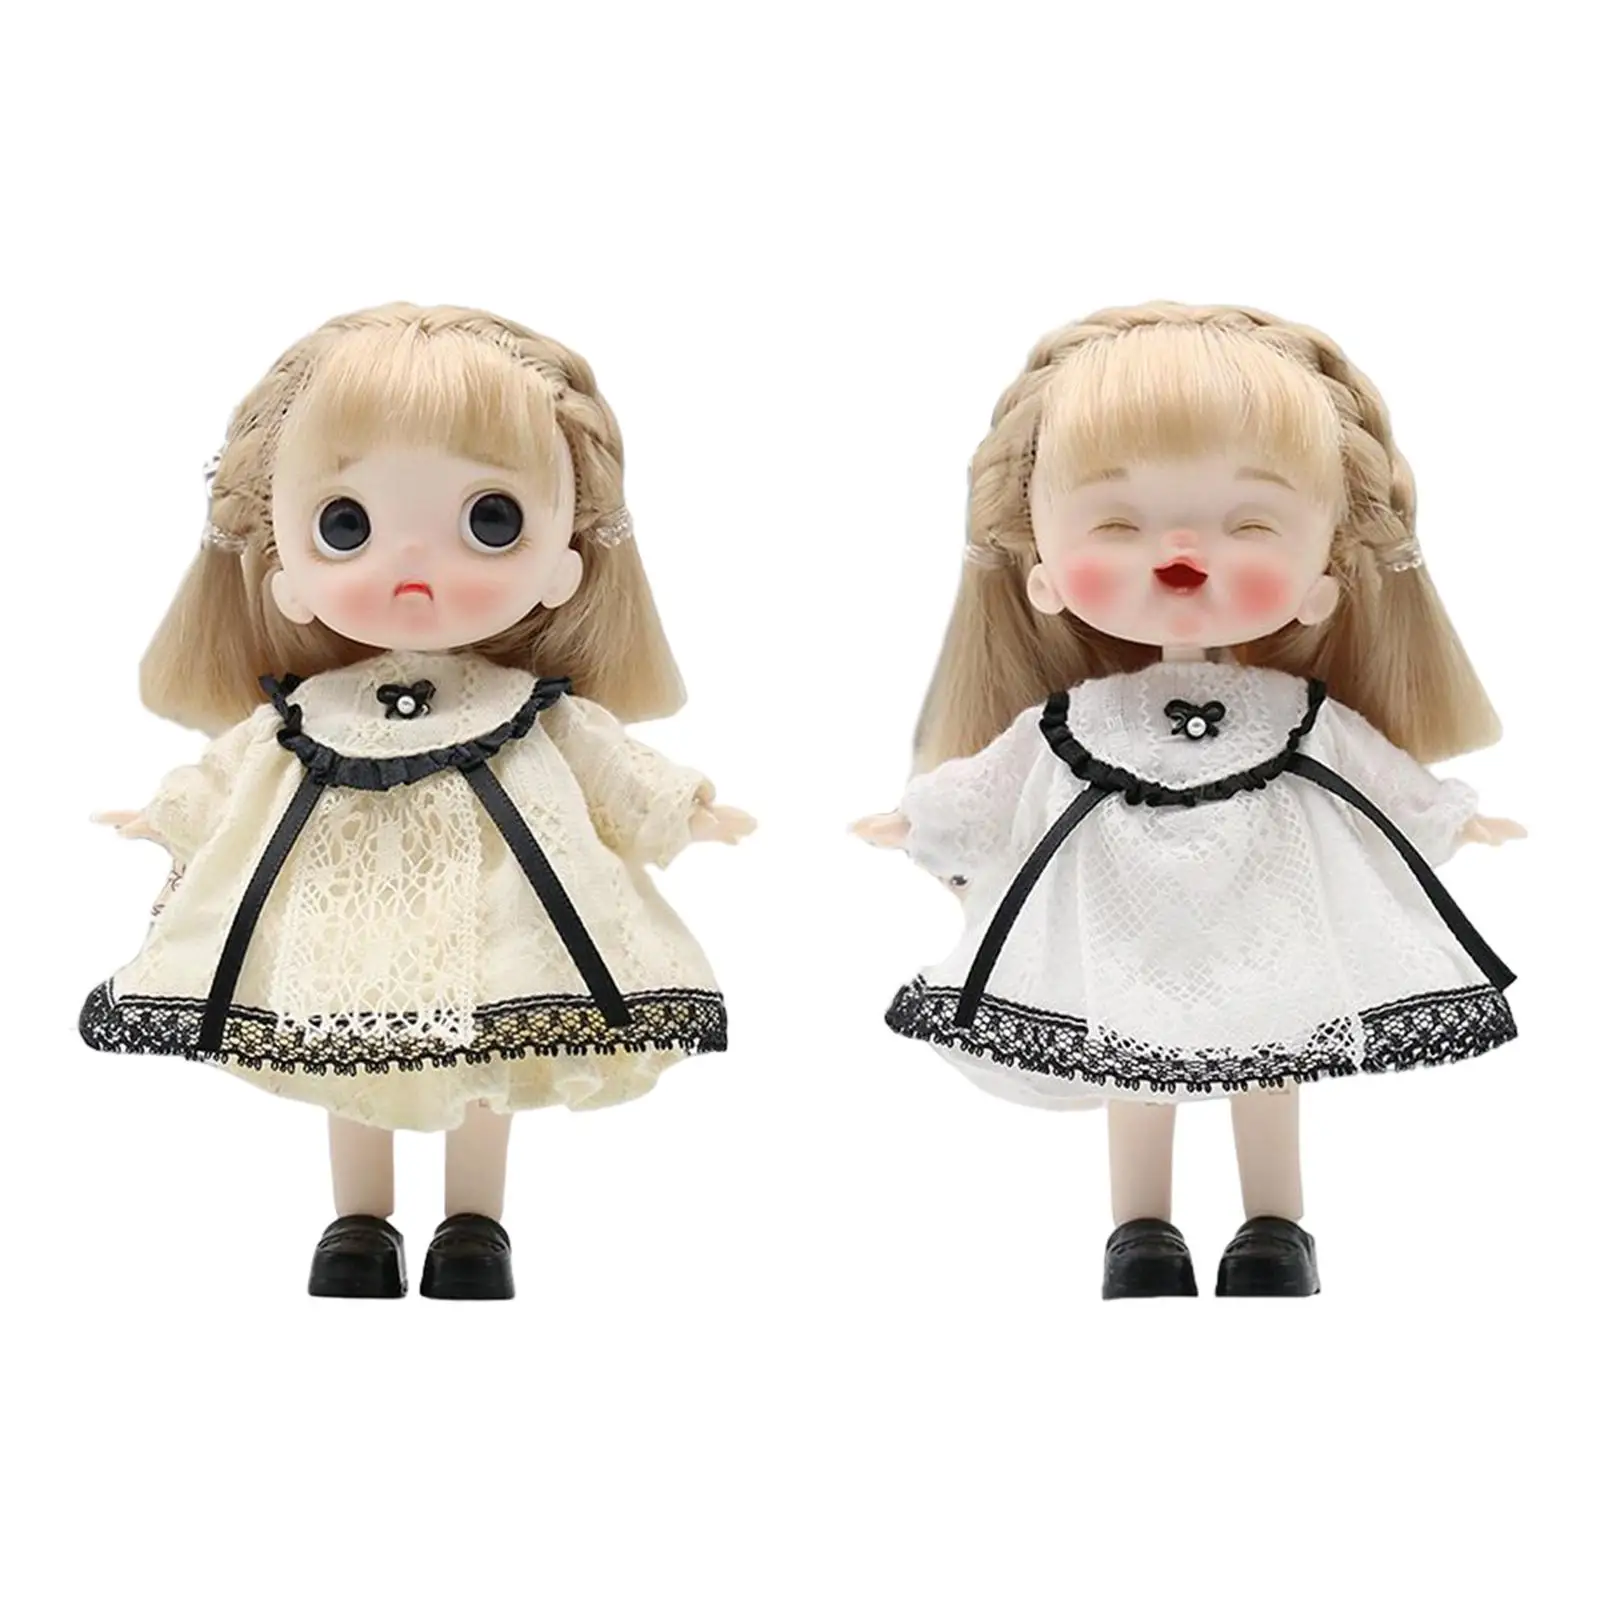 Ball Joints Doll 14cm Kids Girls Toys Dress up Accessories makeup Doll for Birthday